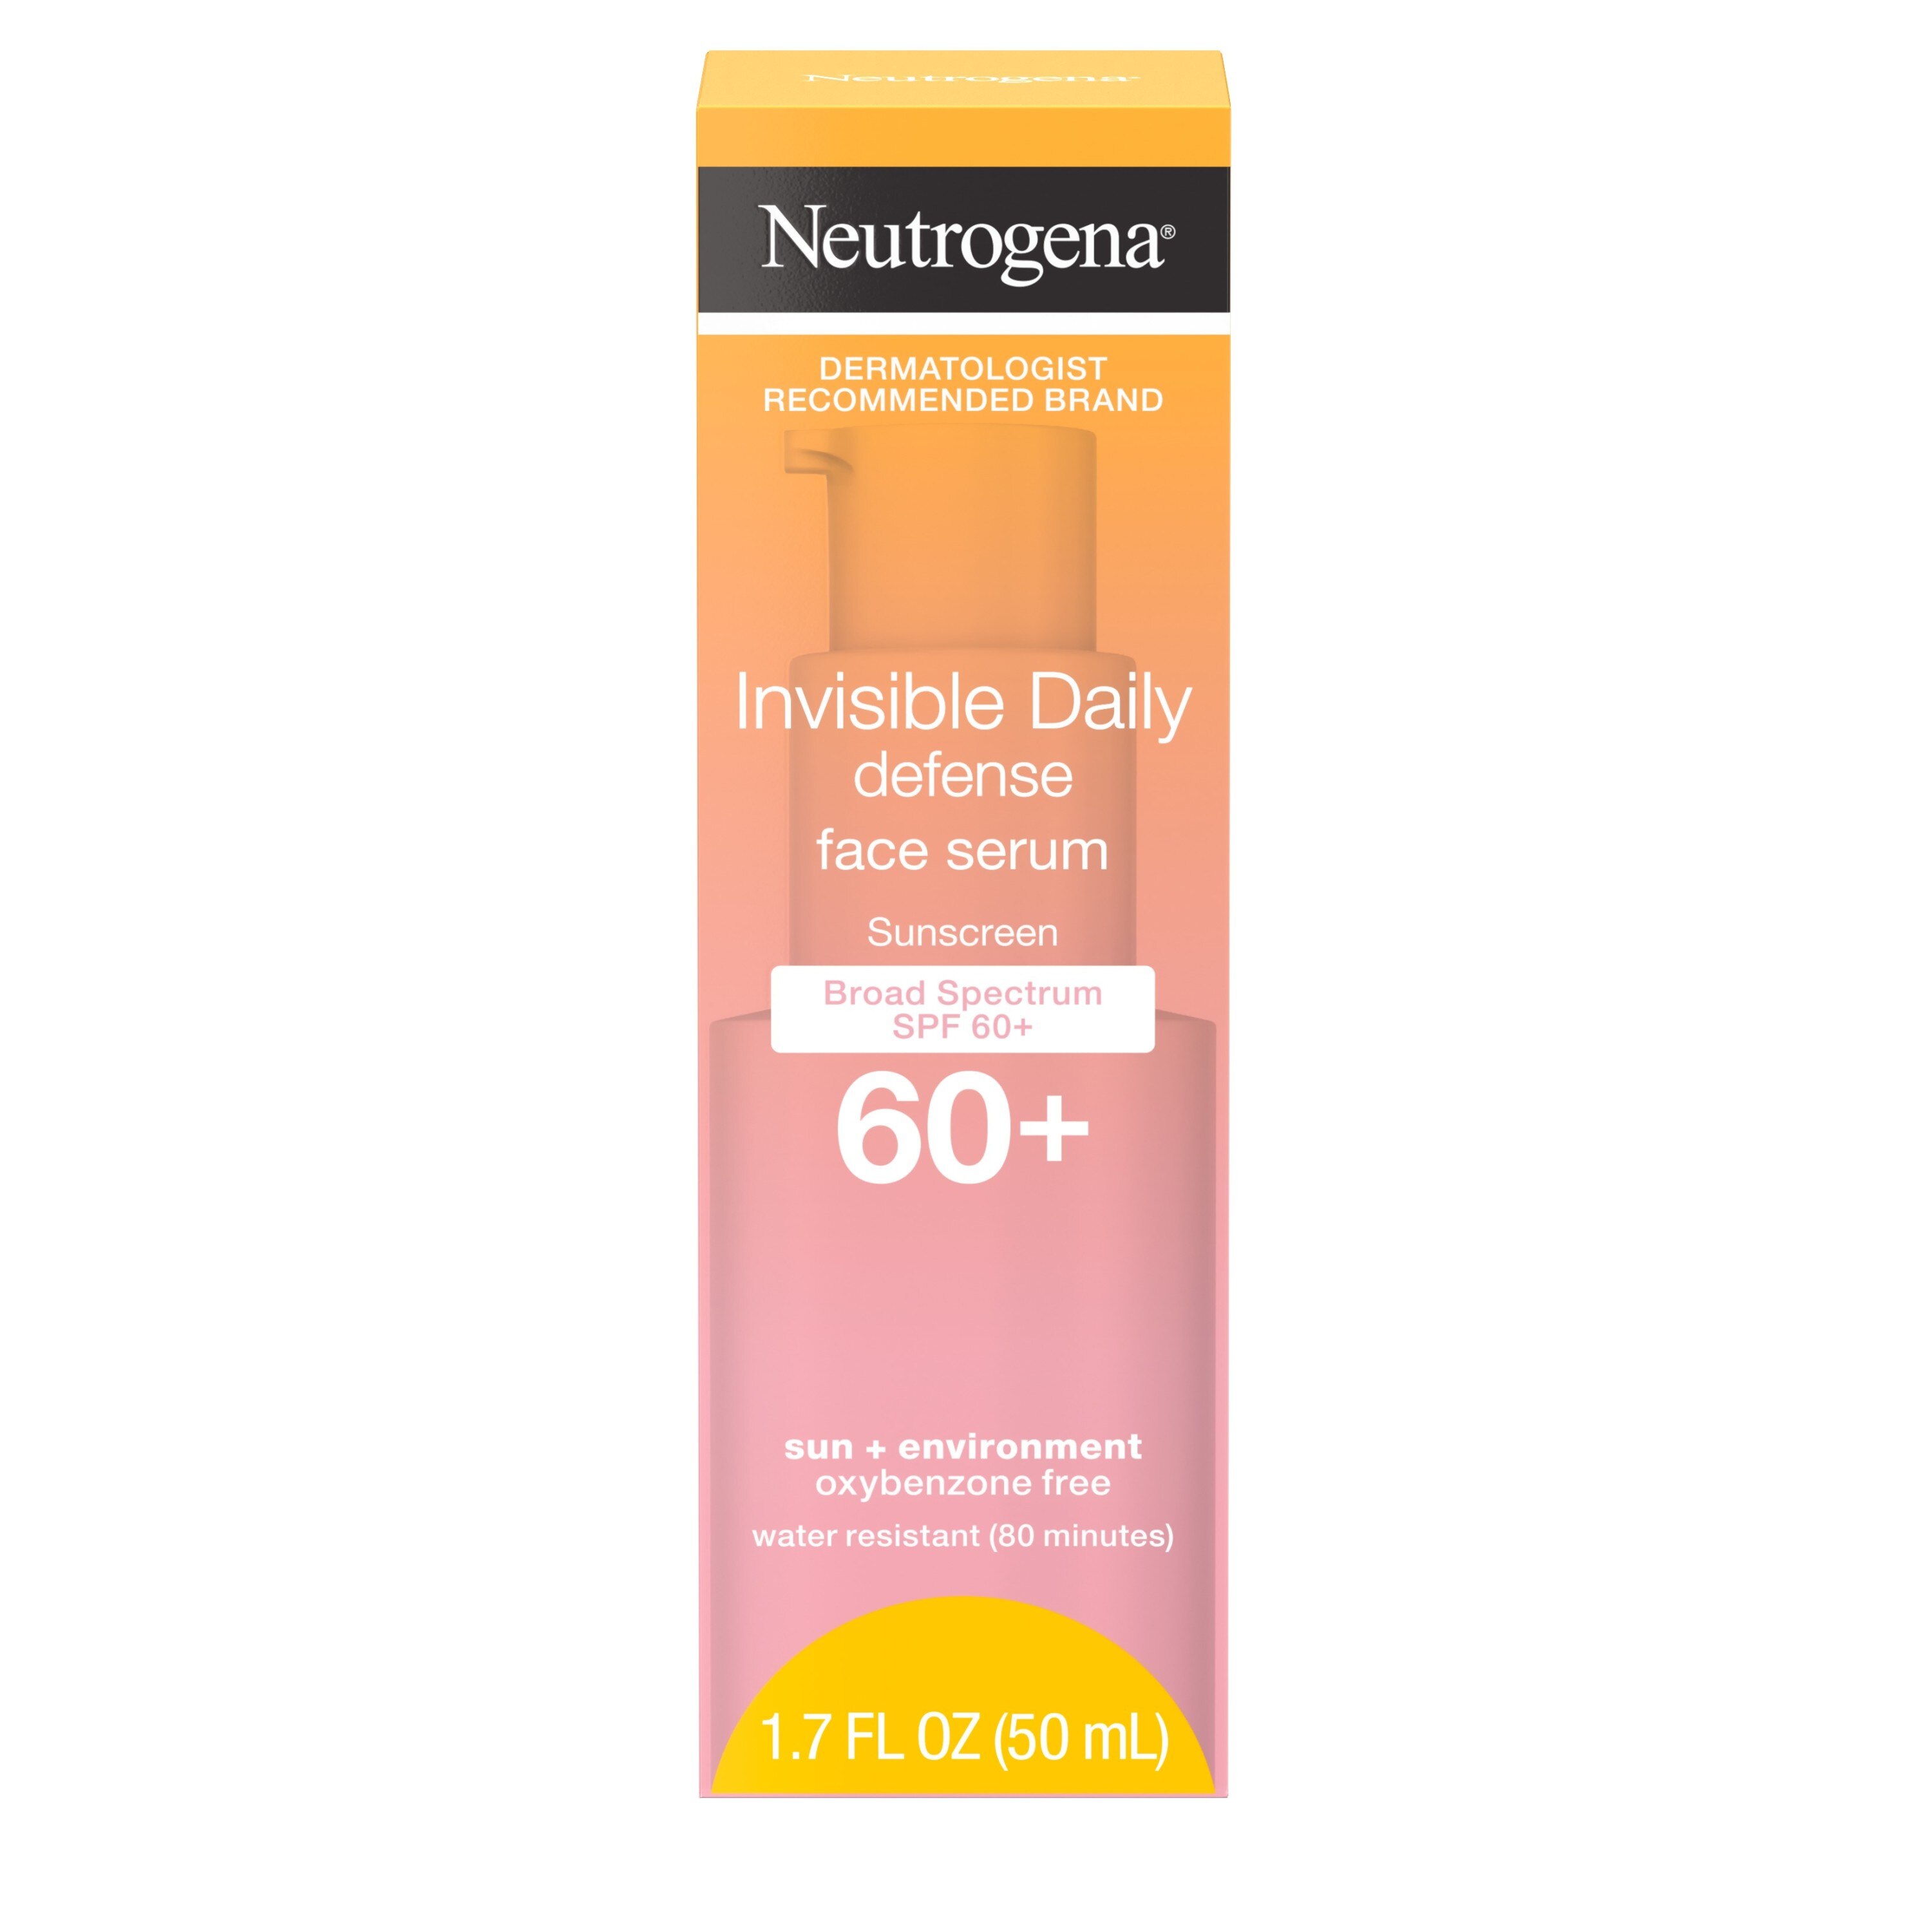 Neutrogena Invisible Daily Defense Face Serum with SPF 60+, 1.7 OZ